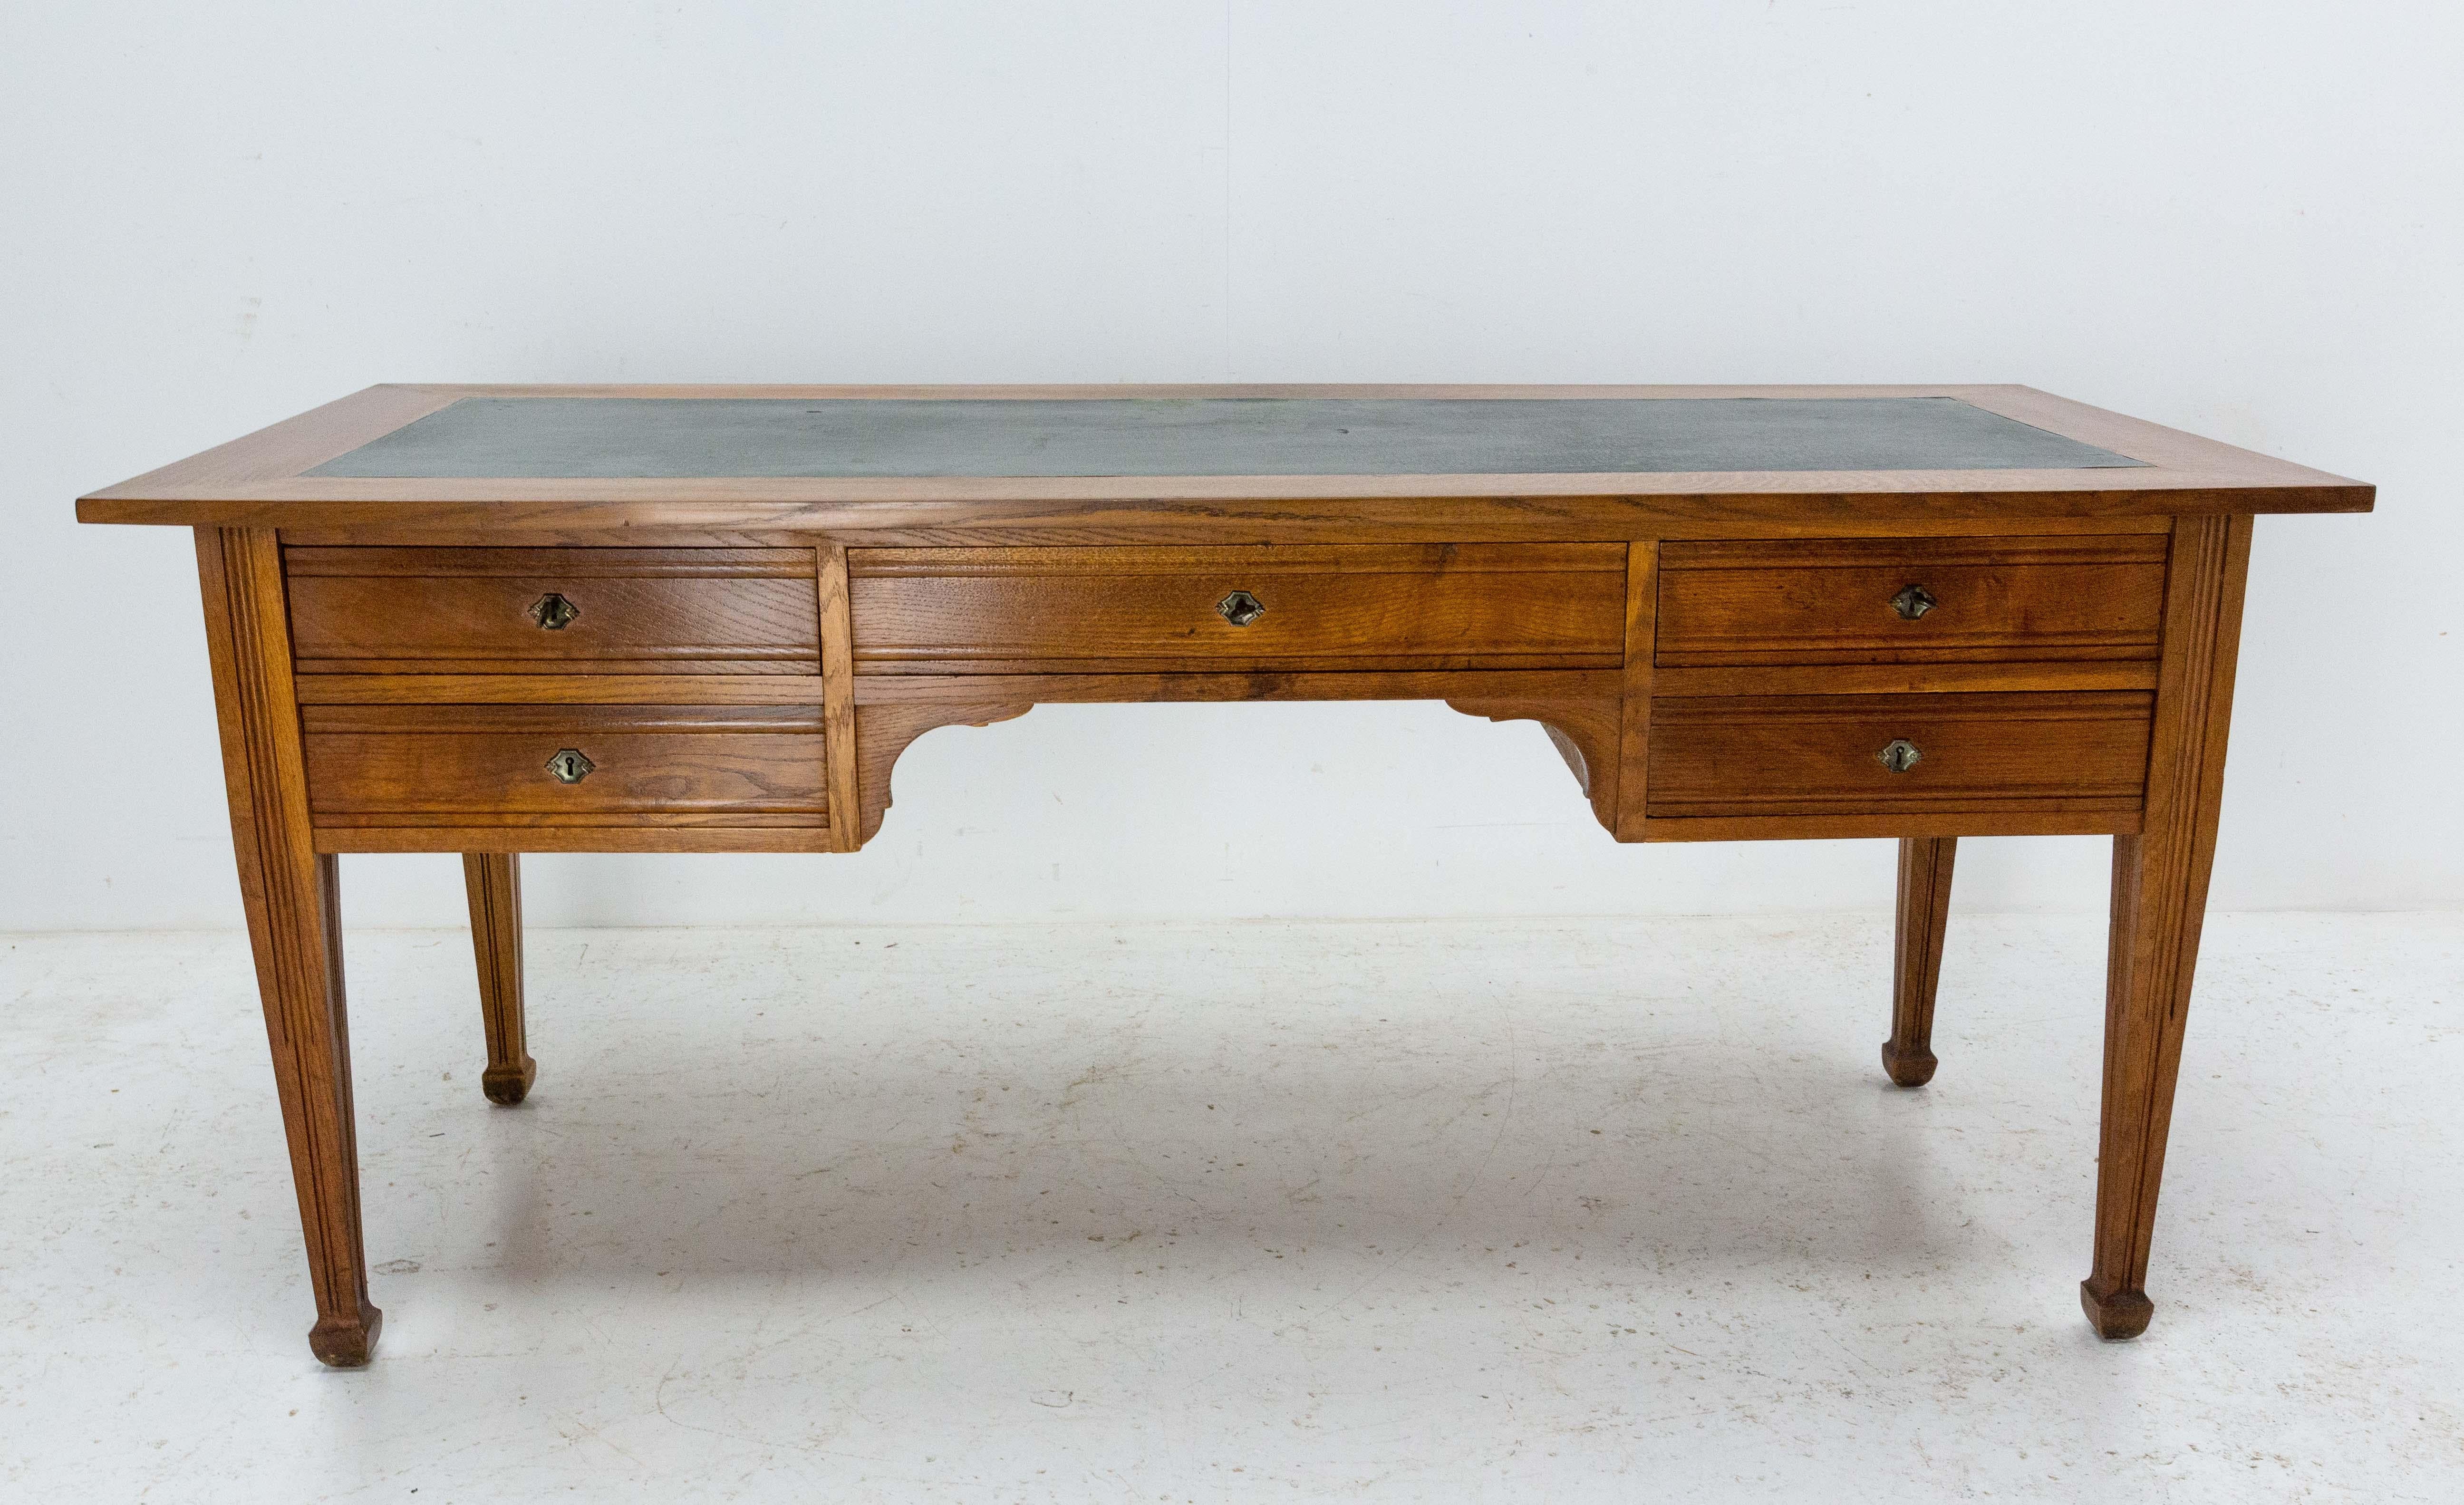 French oak desk with five drawers, circa 1940.
The top of the desk is recovered of coated fabric which can be repainted (see photo).
Leg passage under the desk: 22.44 in. (57 cm)

Shipping: 
L170 P61 H100 136 KG.